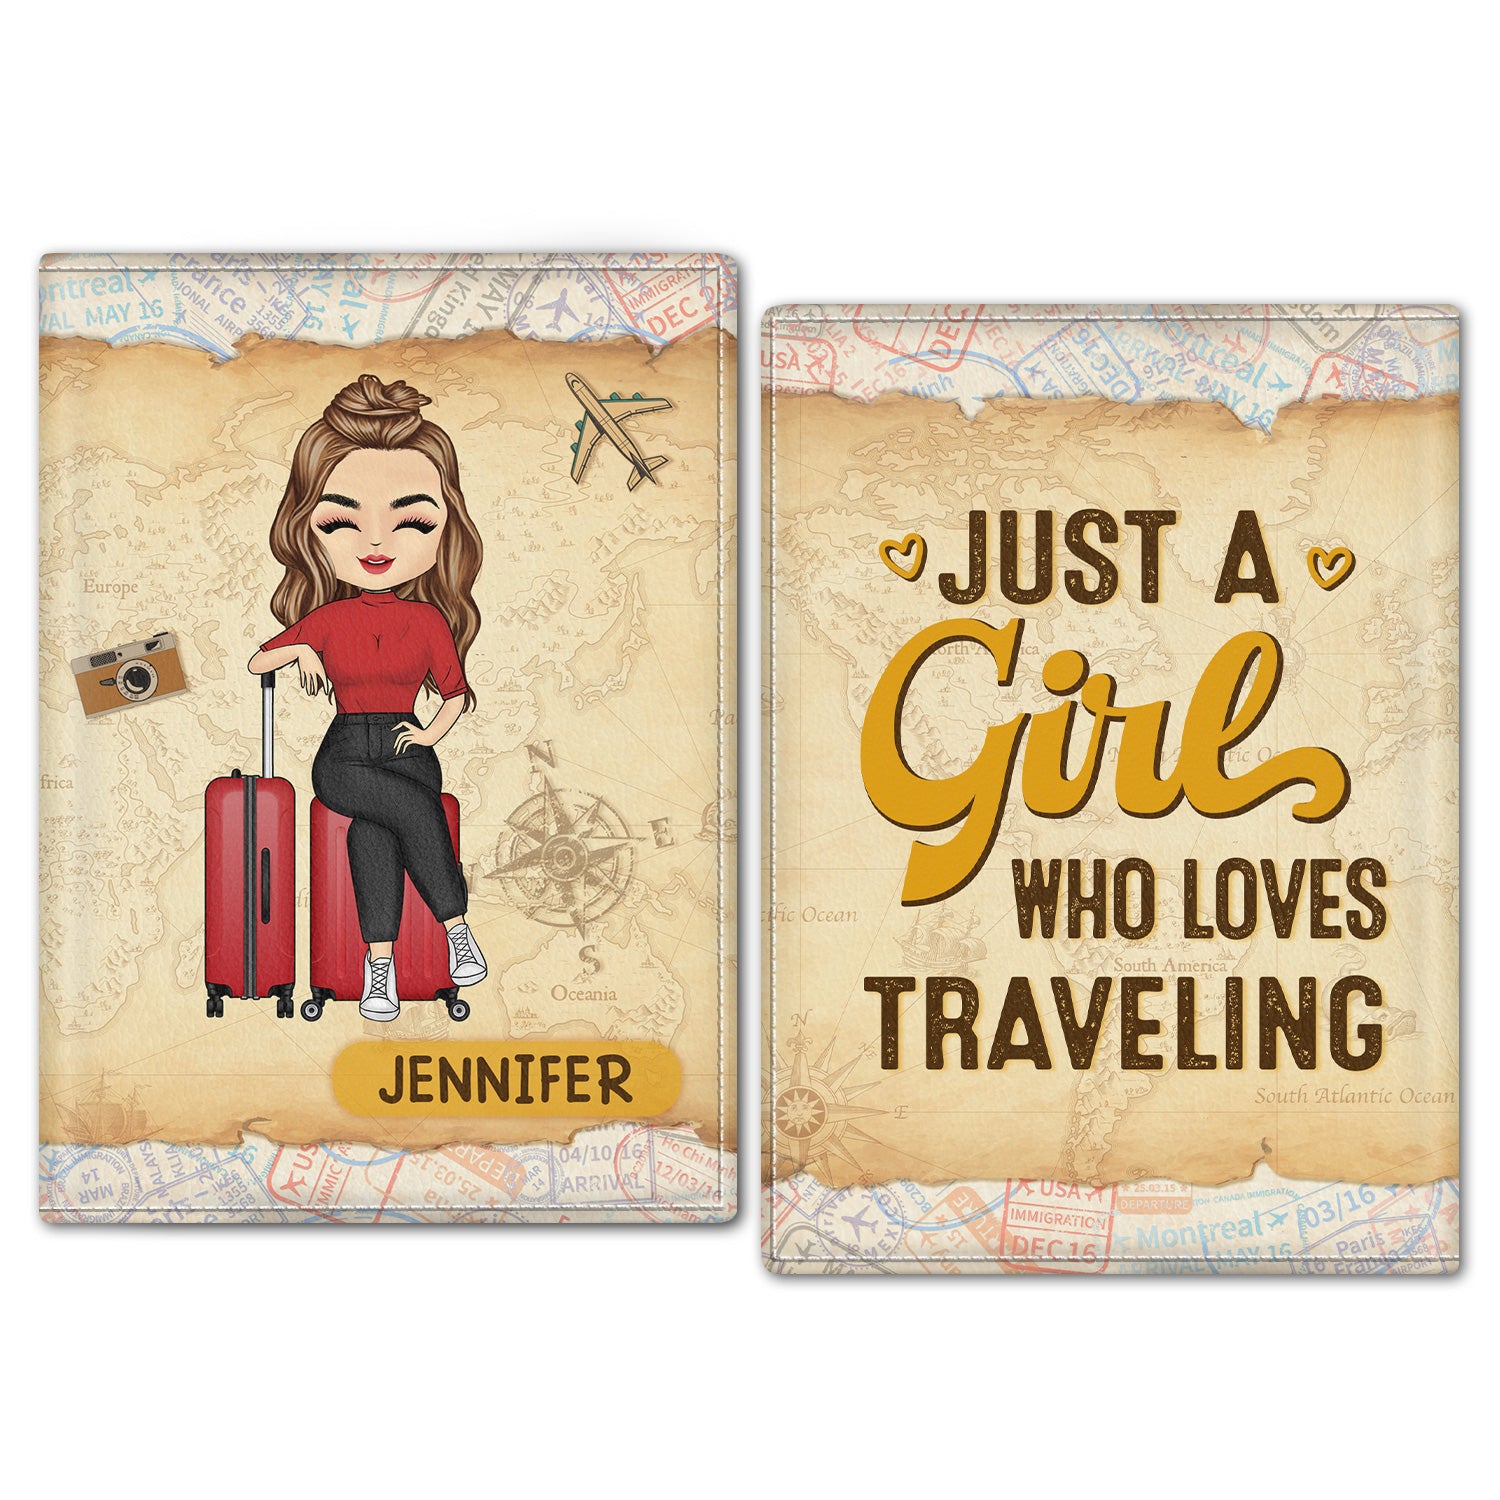 Just A Girl Boy Who Loves Traveling Vintage - Birthday, Summer Gift For Him, Her, Vacation Lovers, Traveling Lovers - Personalized Passport Cover, Passport Holder